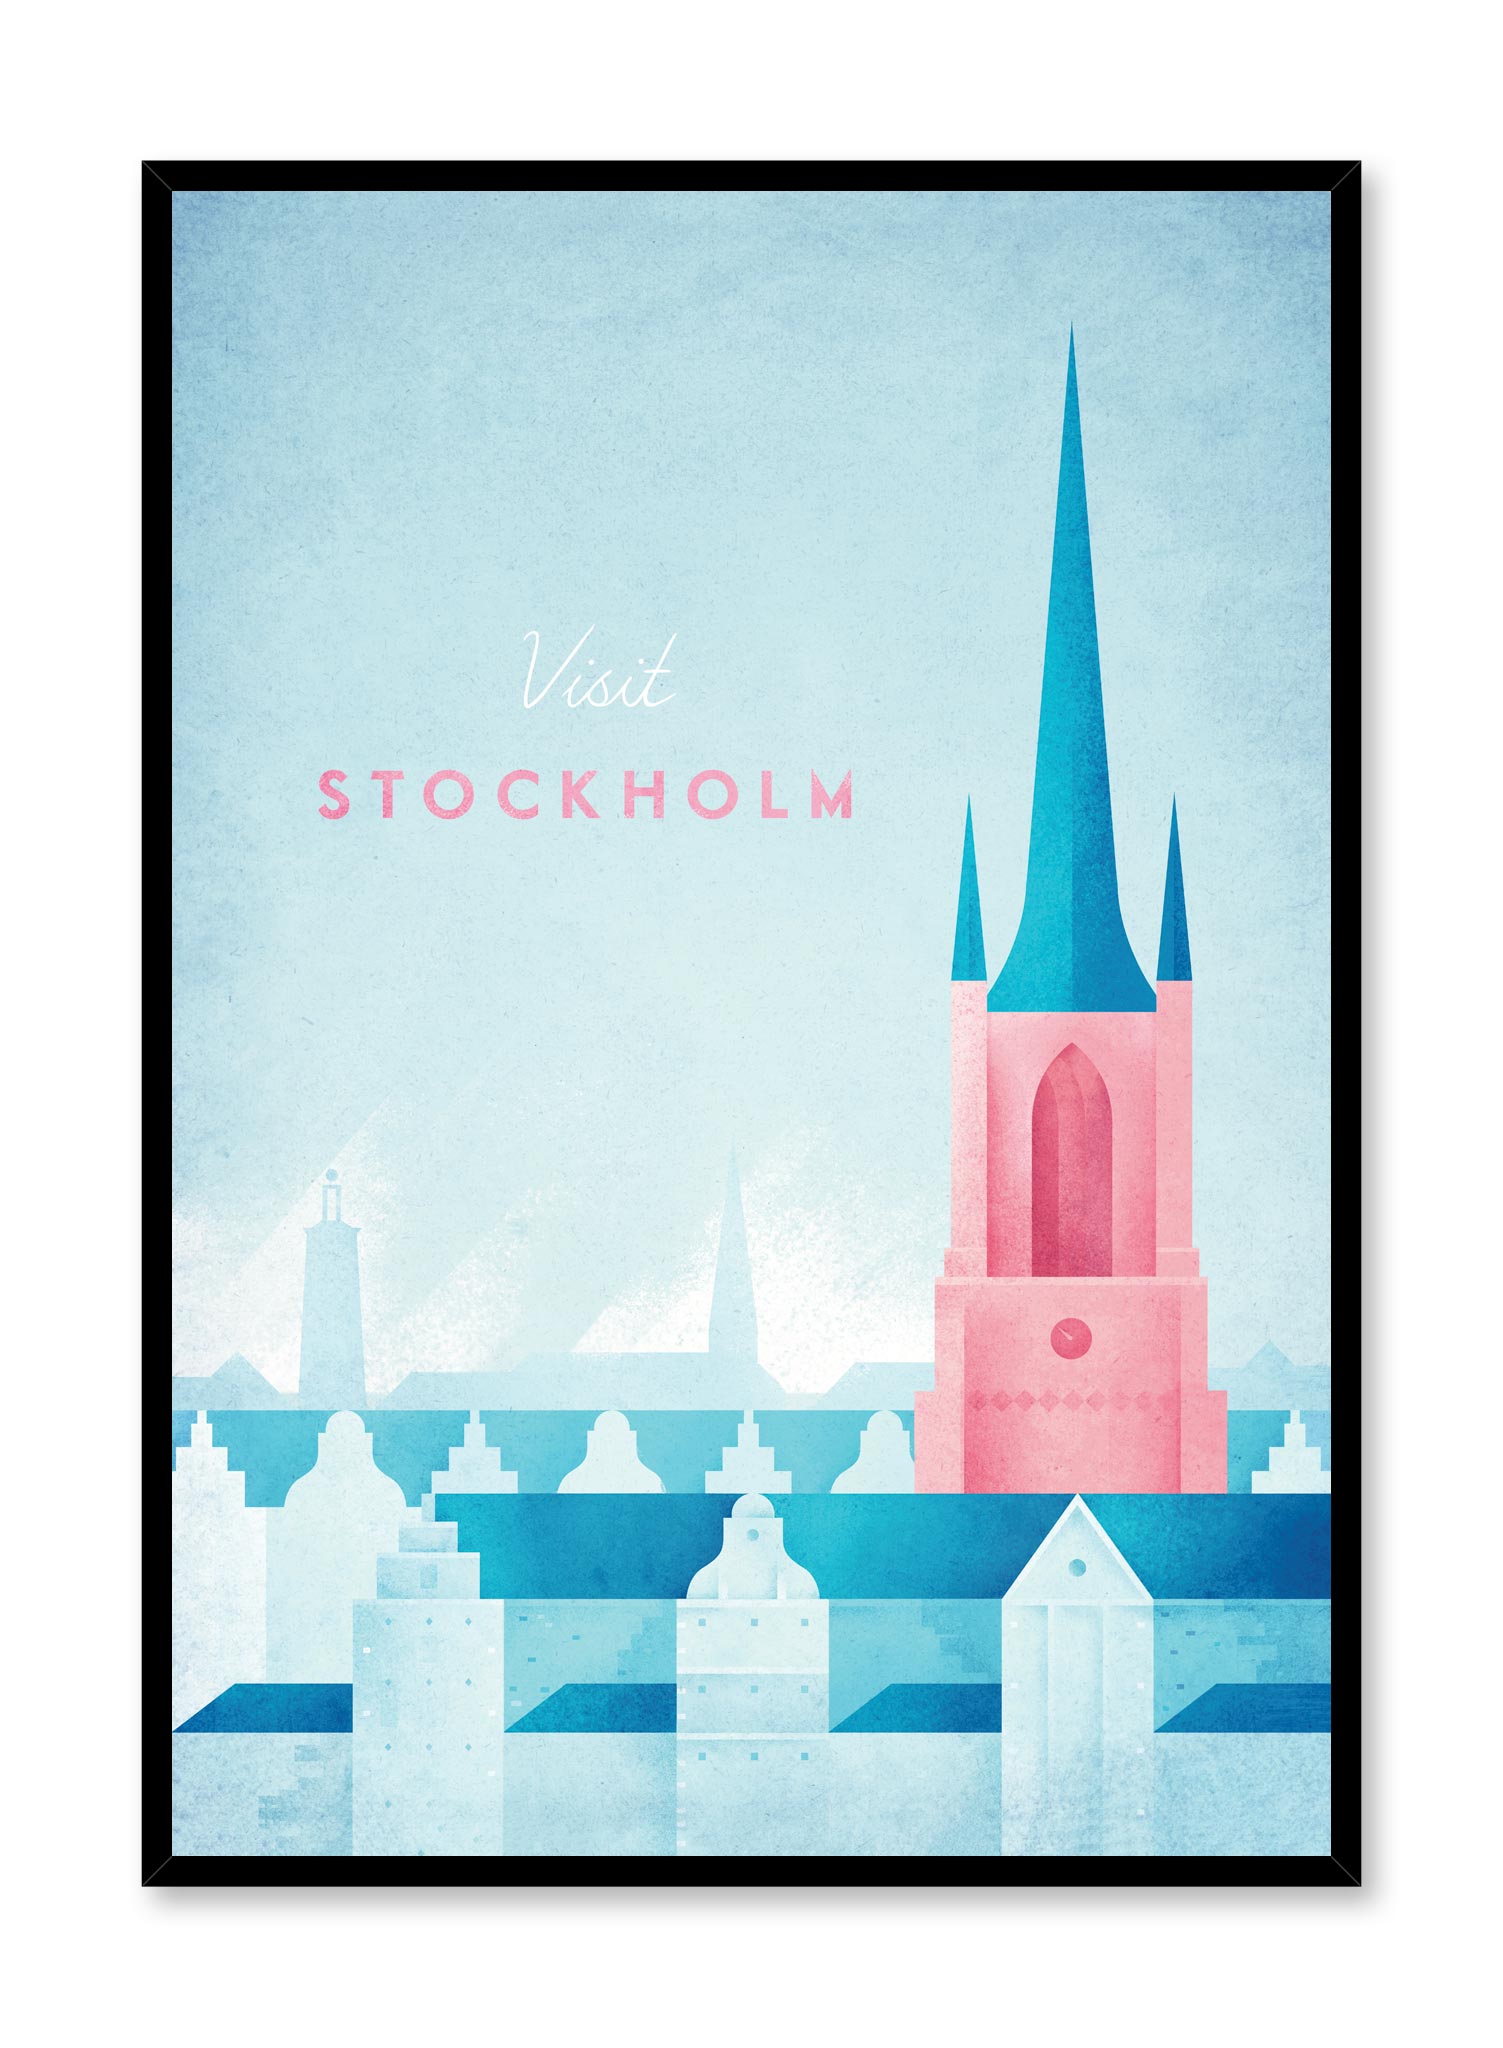 Modern minimalist travel poster by Opposite Wall with illustration of Stockholm, Sweden